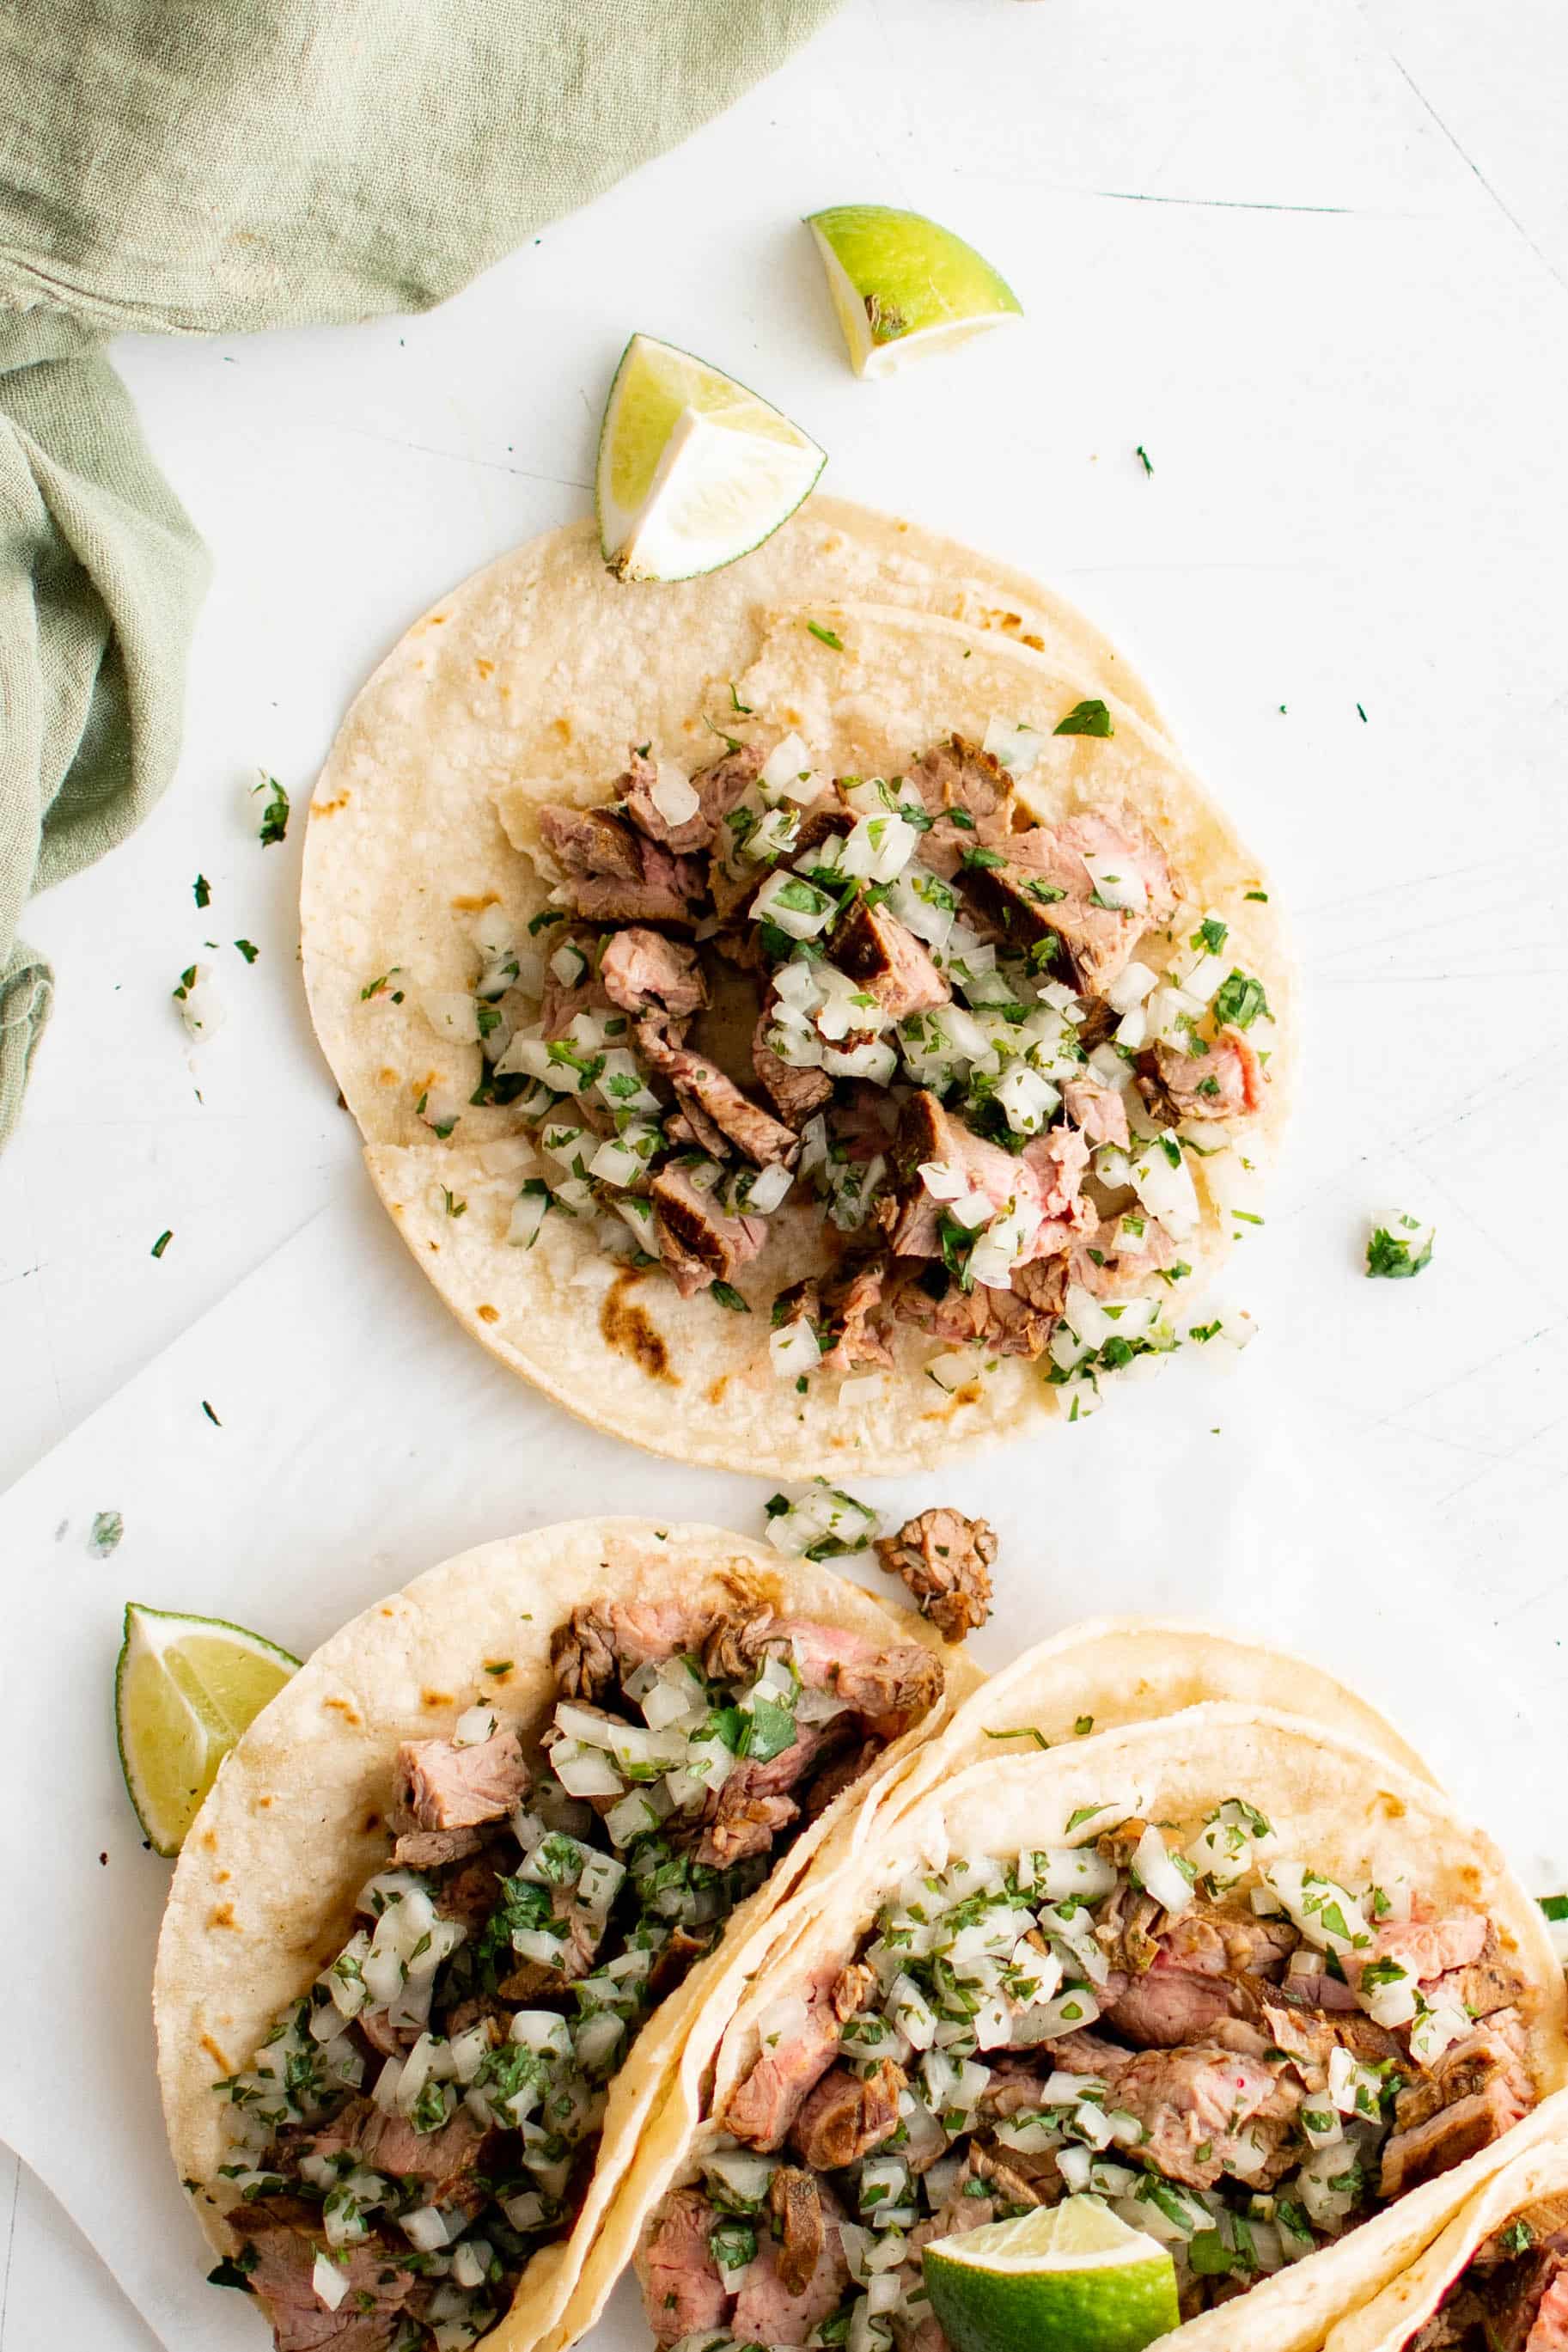 Several carne asada tacos made with corn tortillas and topped with a fresh onion, cilantro, and lime juice salsa.